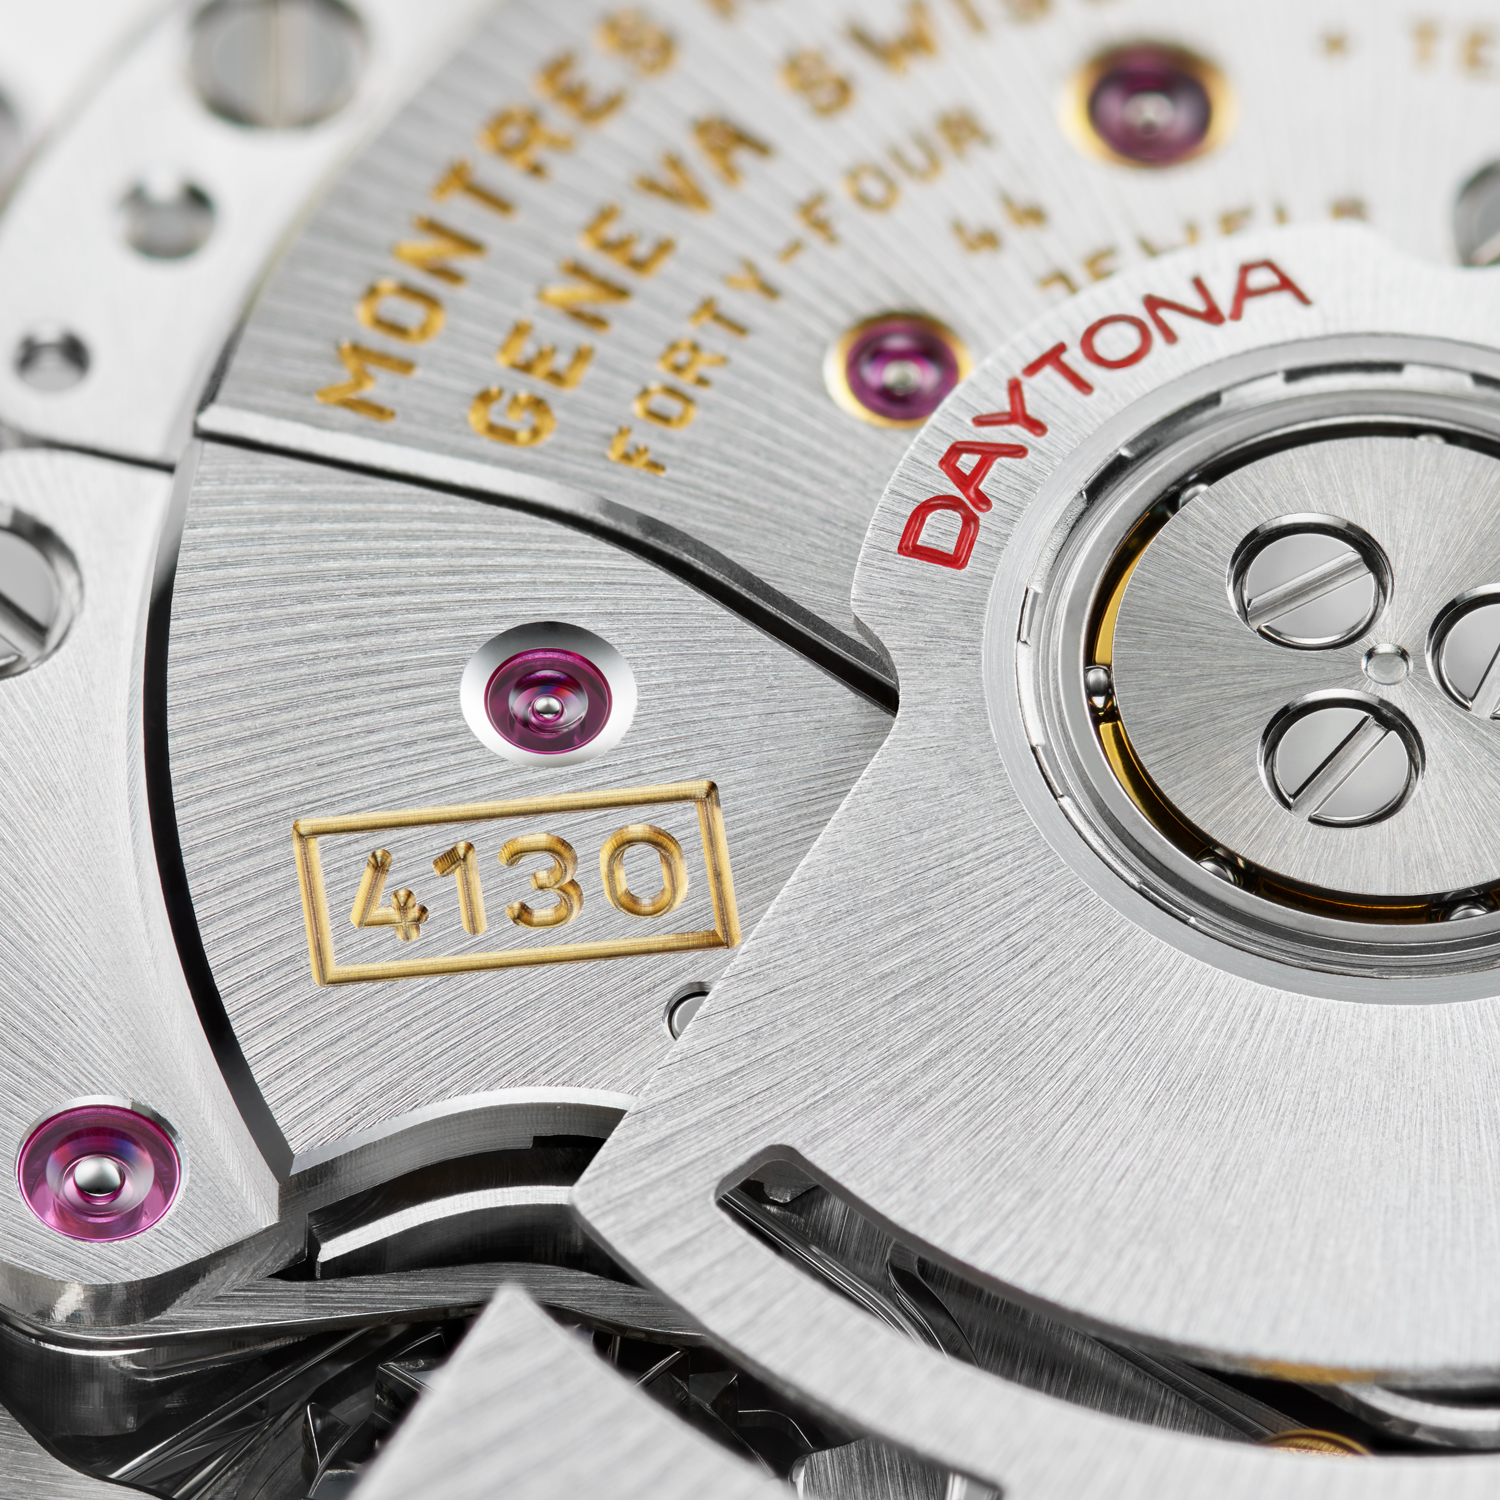 Before the release of the caliber 3235 in 2015, the 4130 was the only movement from Rolex that used ball bearings in the oscillating weight. (Image: Rolex)